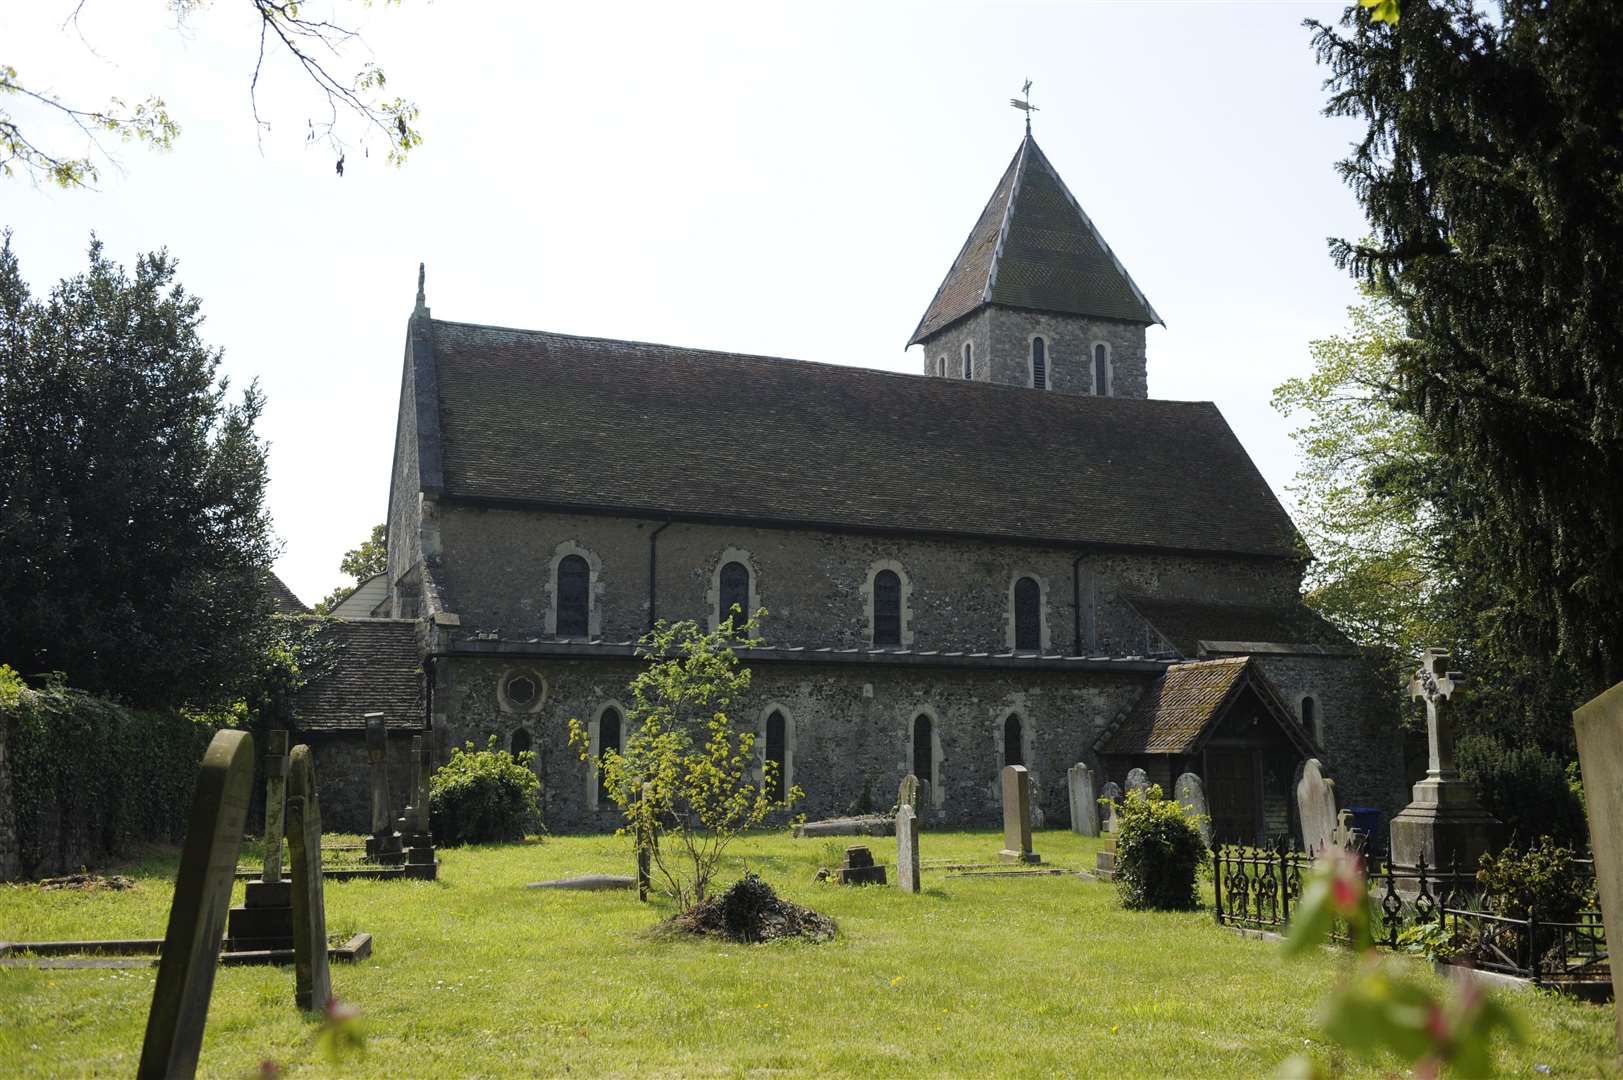 St Mary Magdalene Church in Davington - the scene of weddings and funerals for the Geldof family